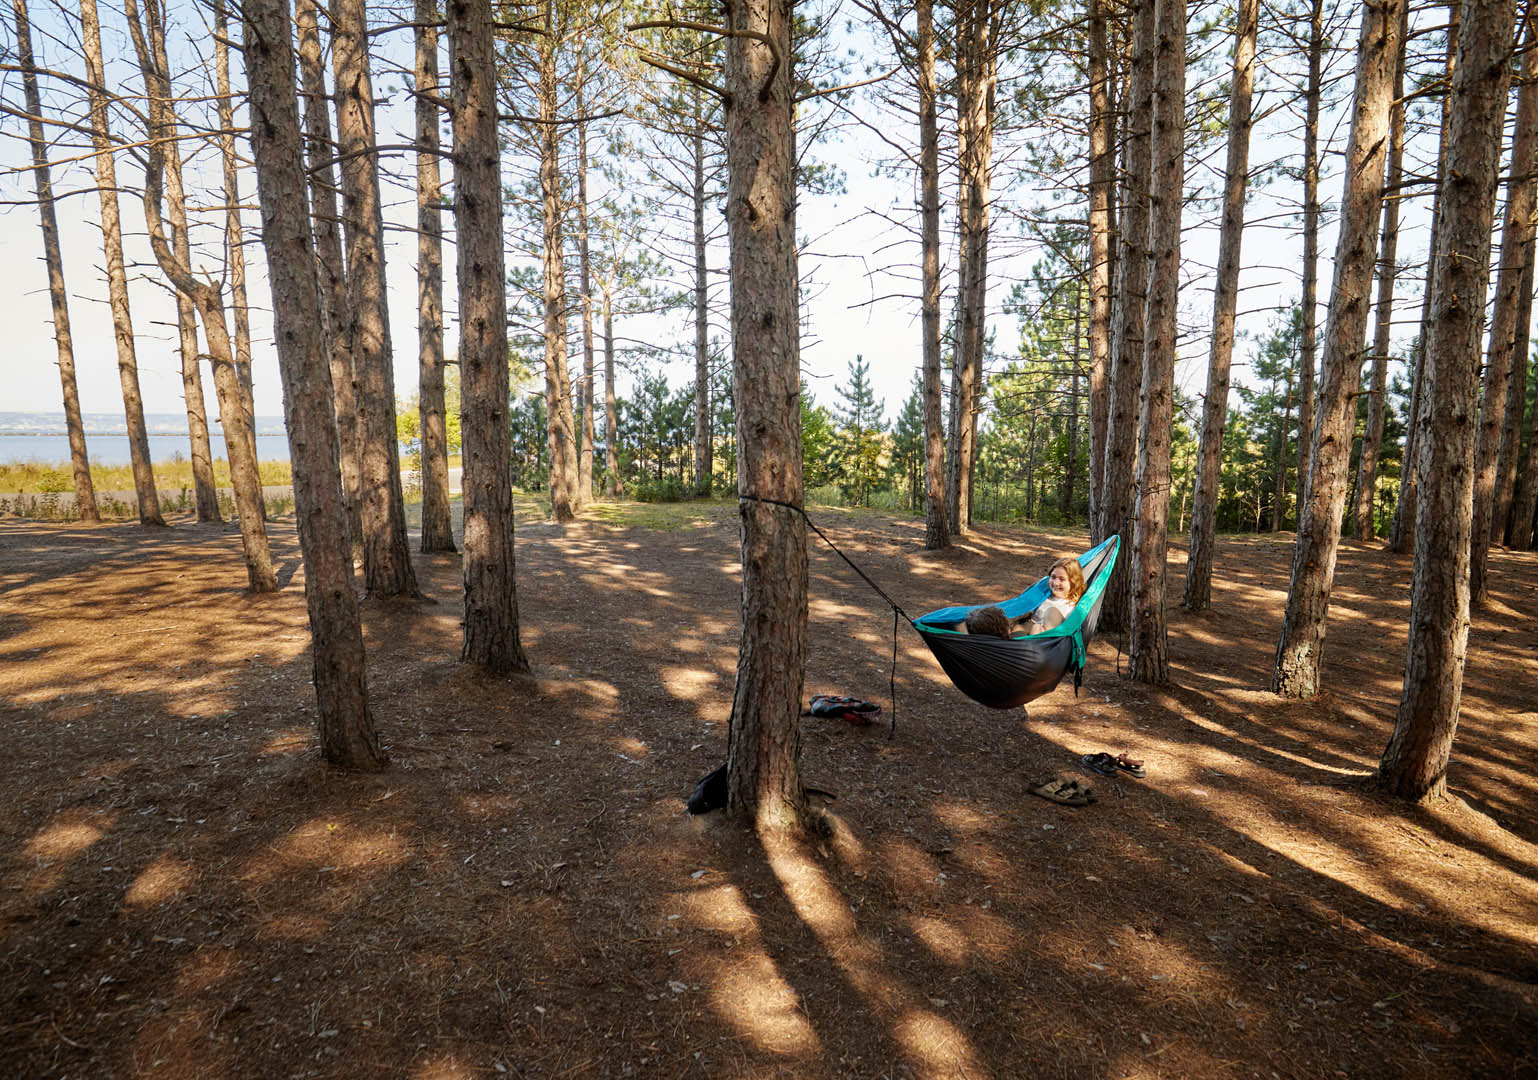 Two people hammocking in a pine forest near some water.